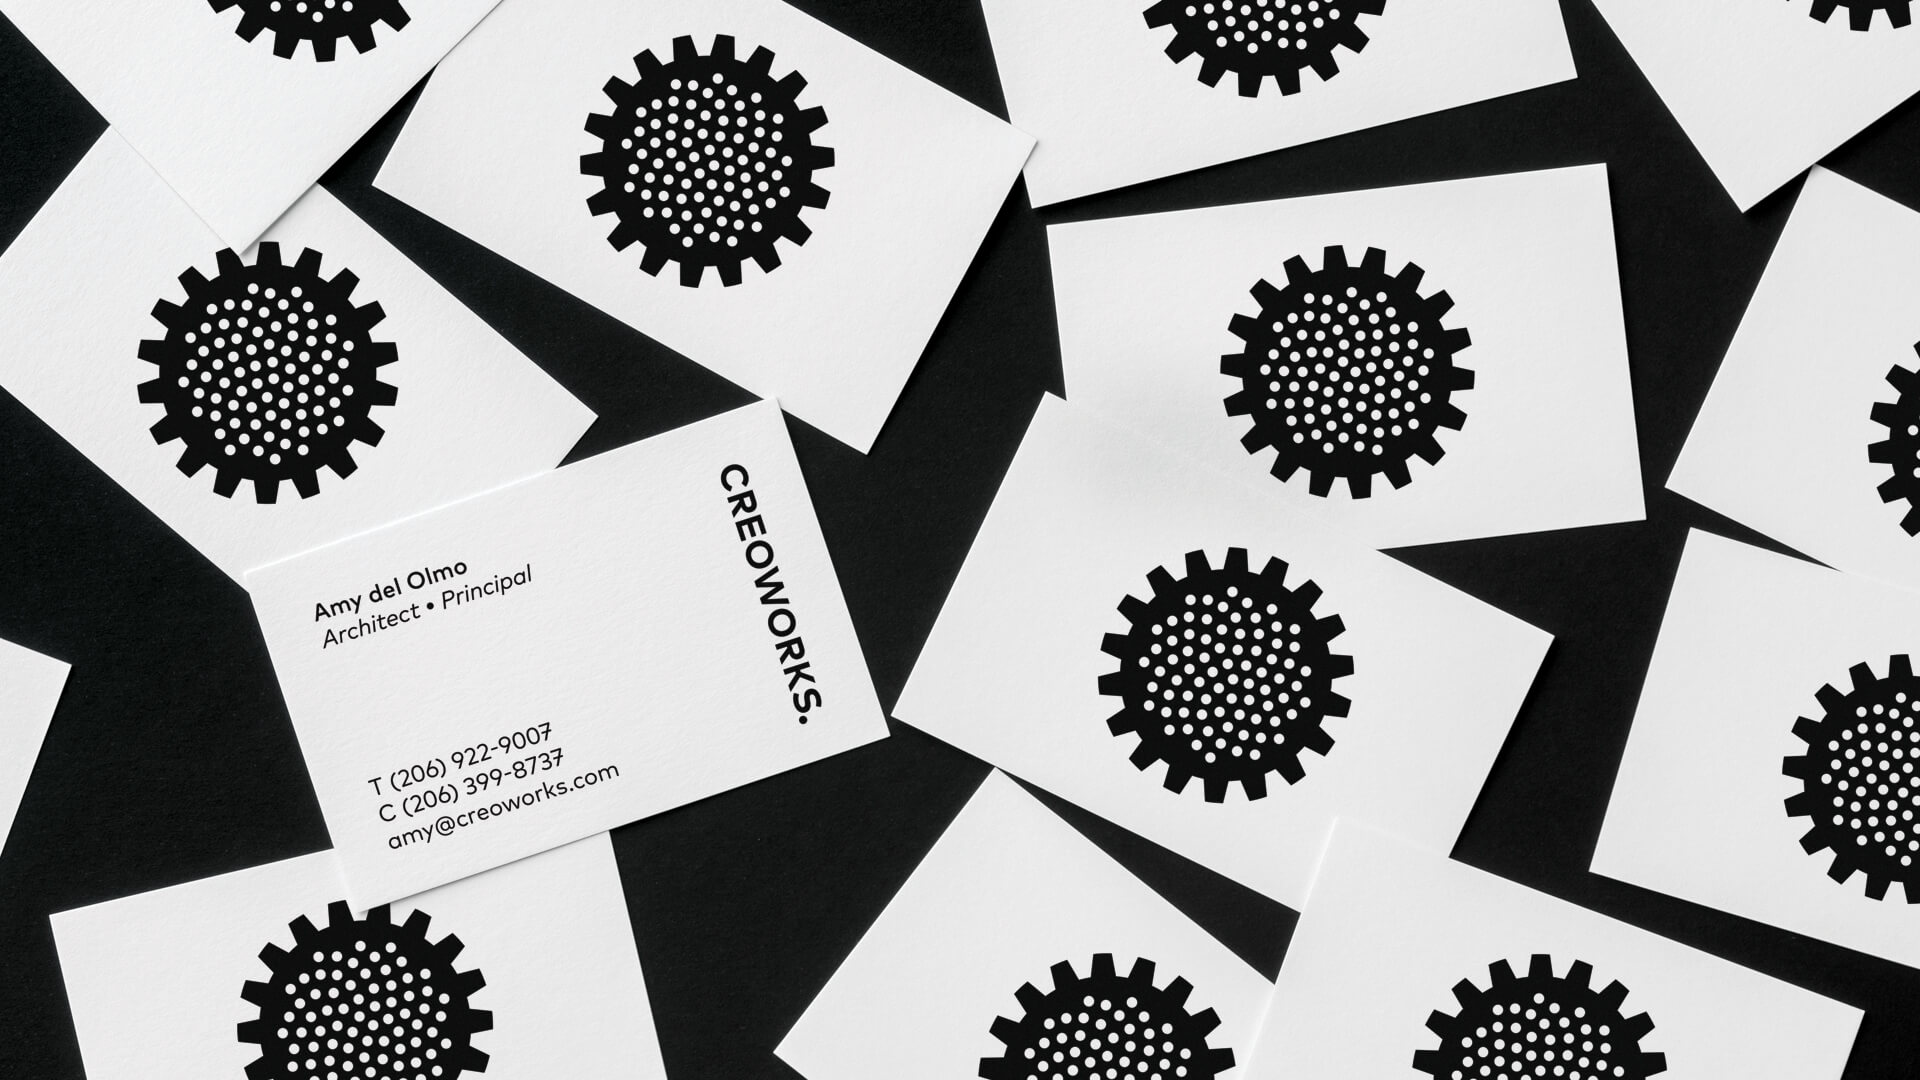 Creoworks_Businsess-cards